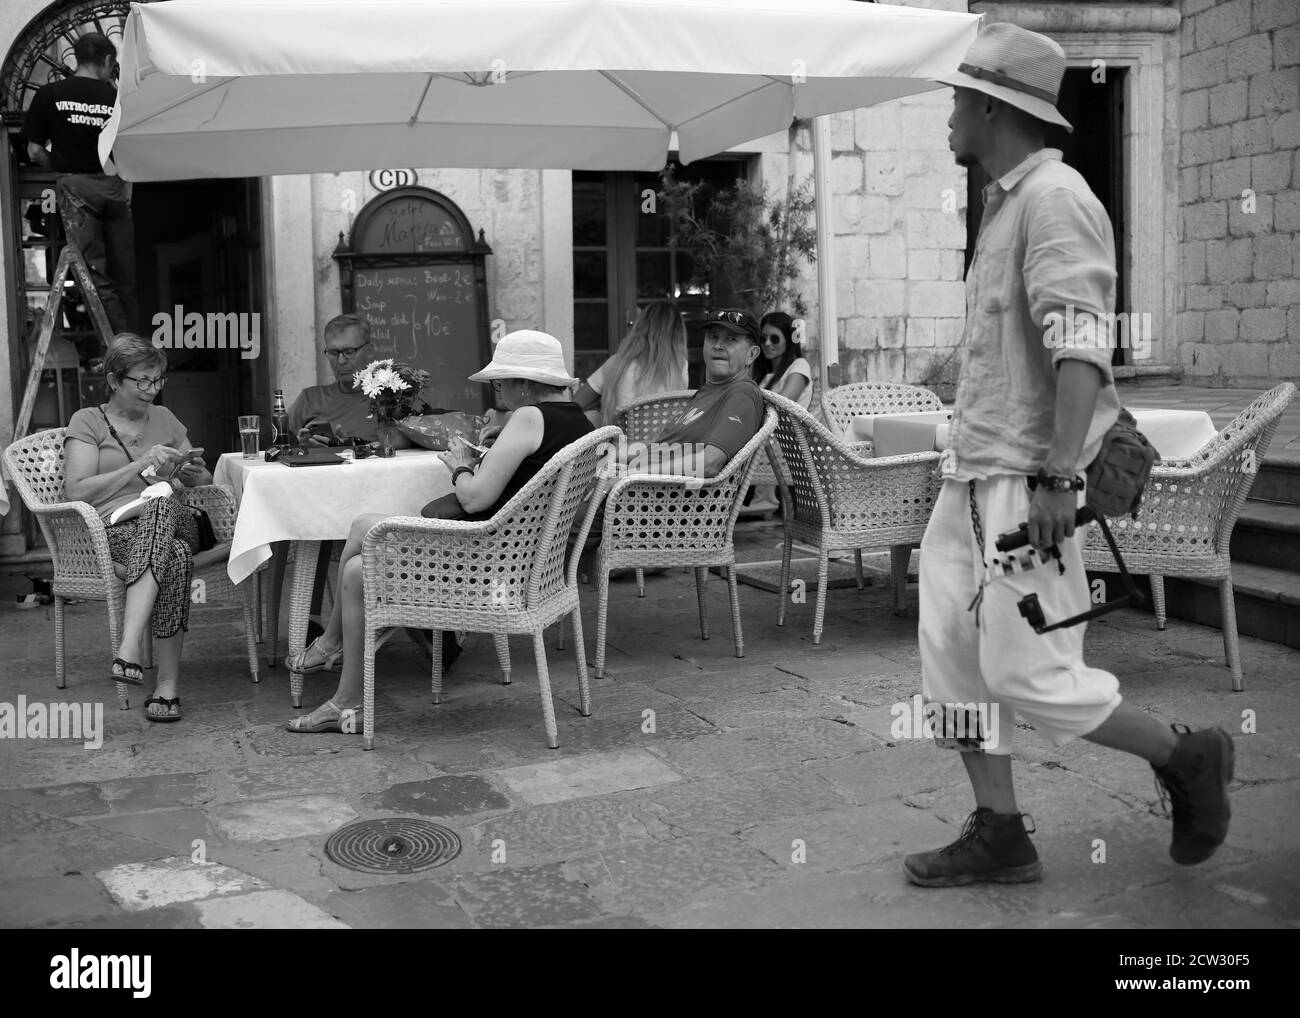 Kotor, Montenegro, Sep 22, 2019: A seated man in a cafe looking exasperated watches passer (B/W) Stock Photo